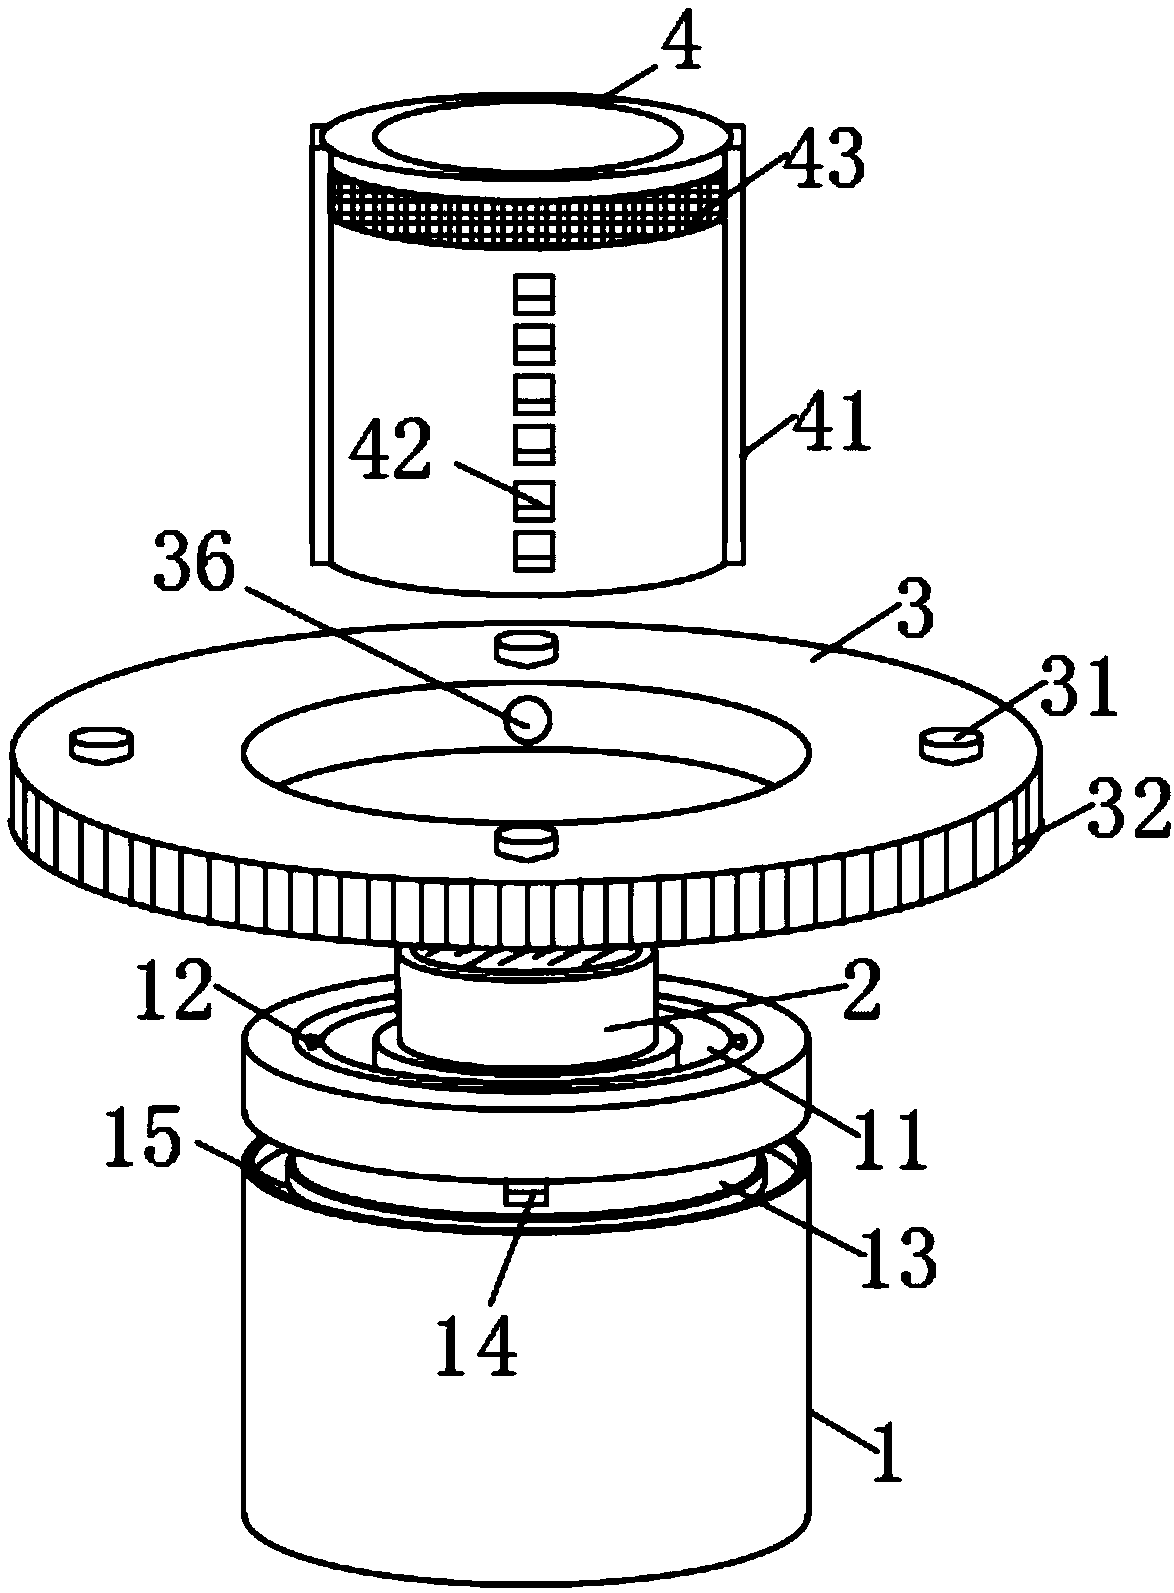 Microscopic ocular protective structure for oral operation